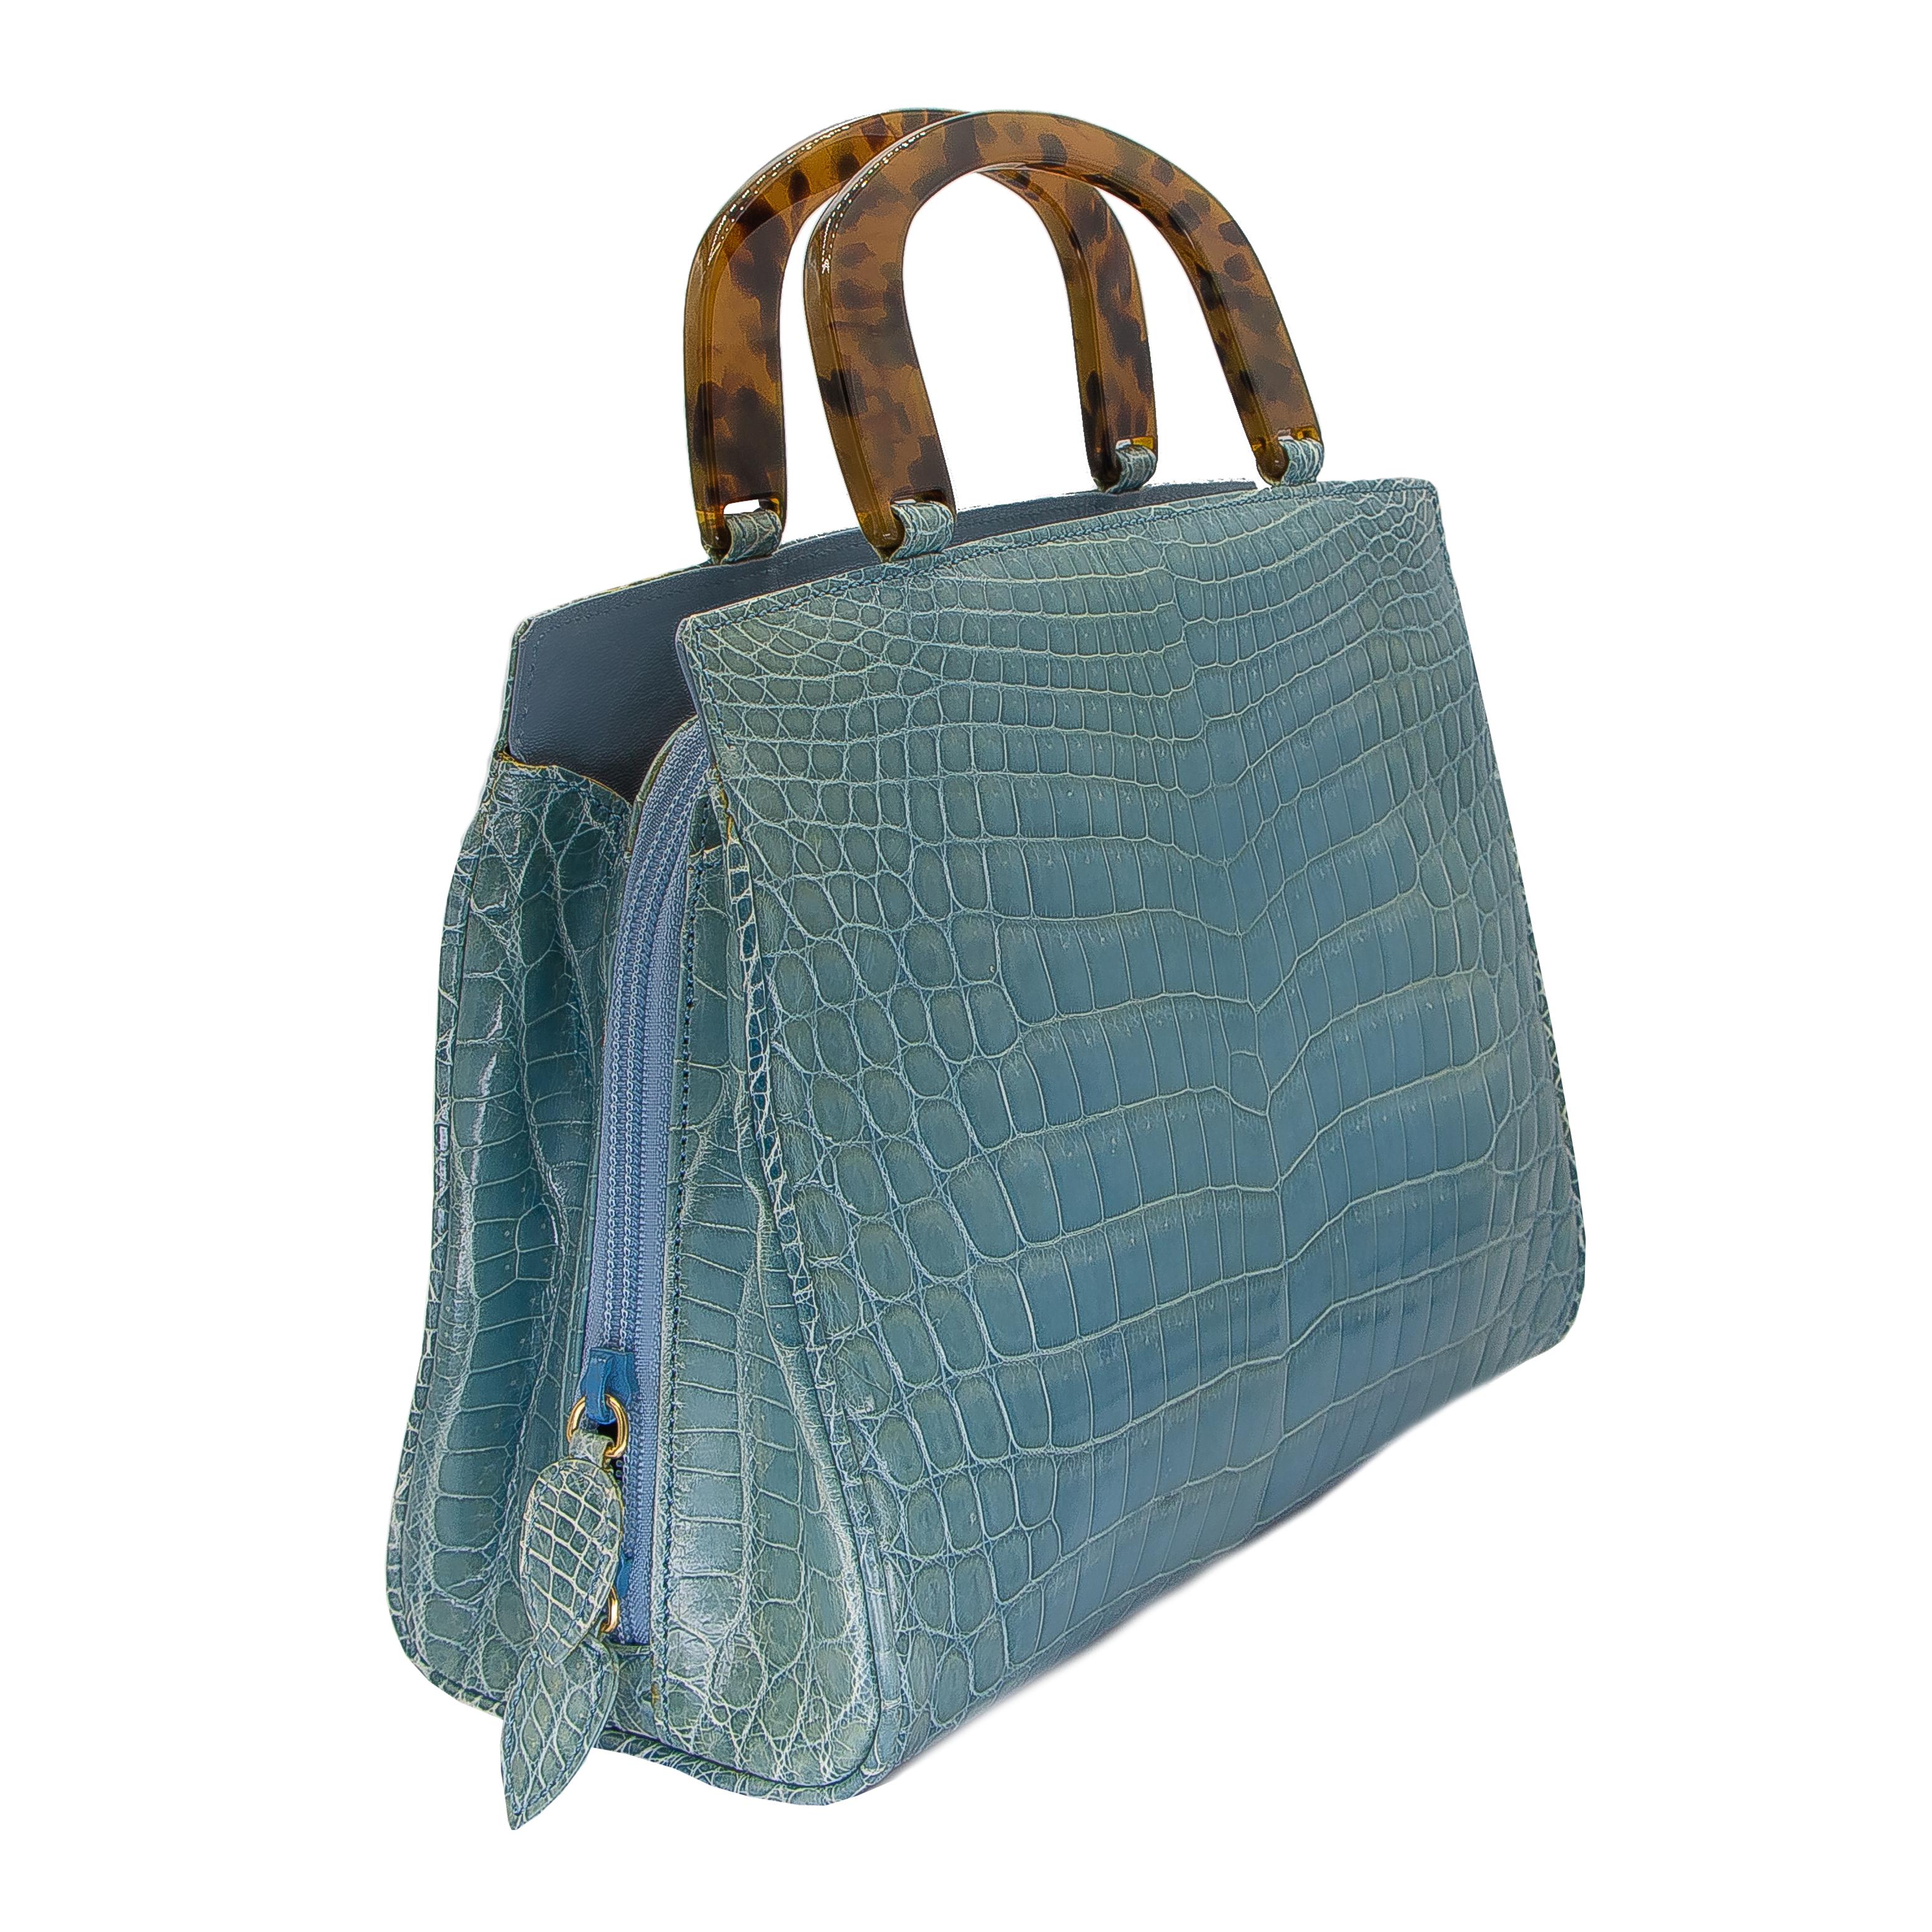 Double zippered middle section with crocodile appointments. Within this, there are 3 side pocket and a 4th zippered pocket. This bag also has a pocket either side of the zippered middle section, and an exterior pocket with a magnetic closure. The